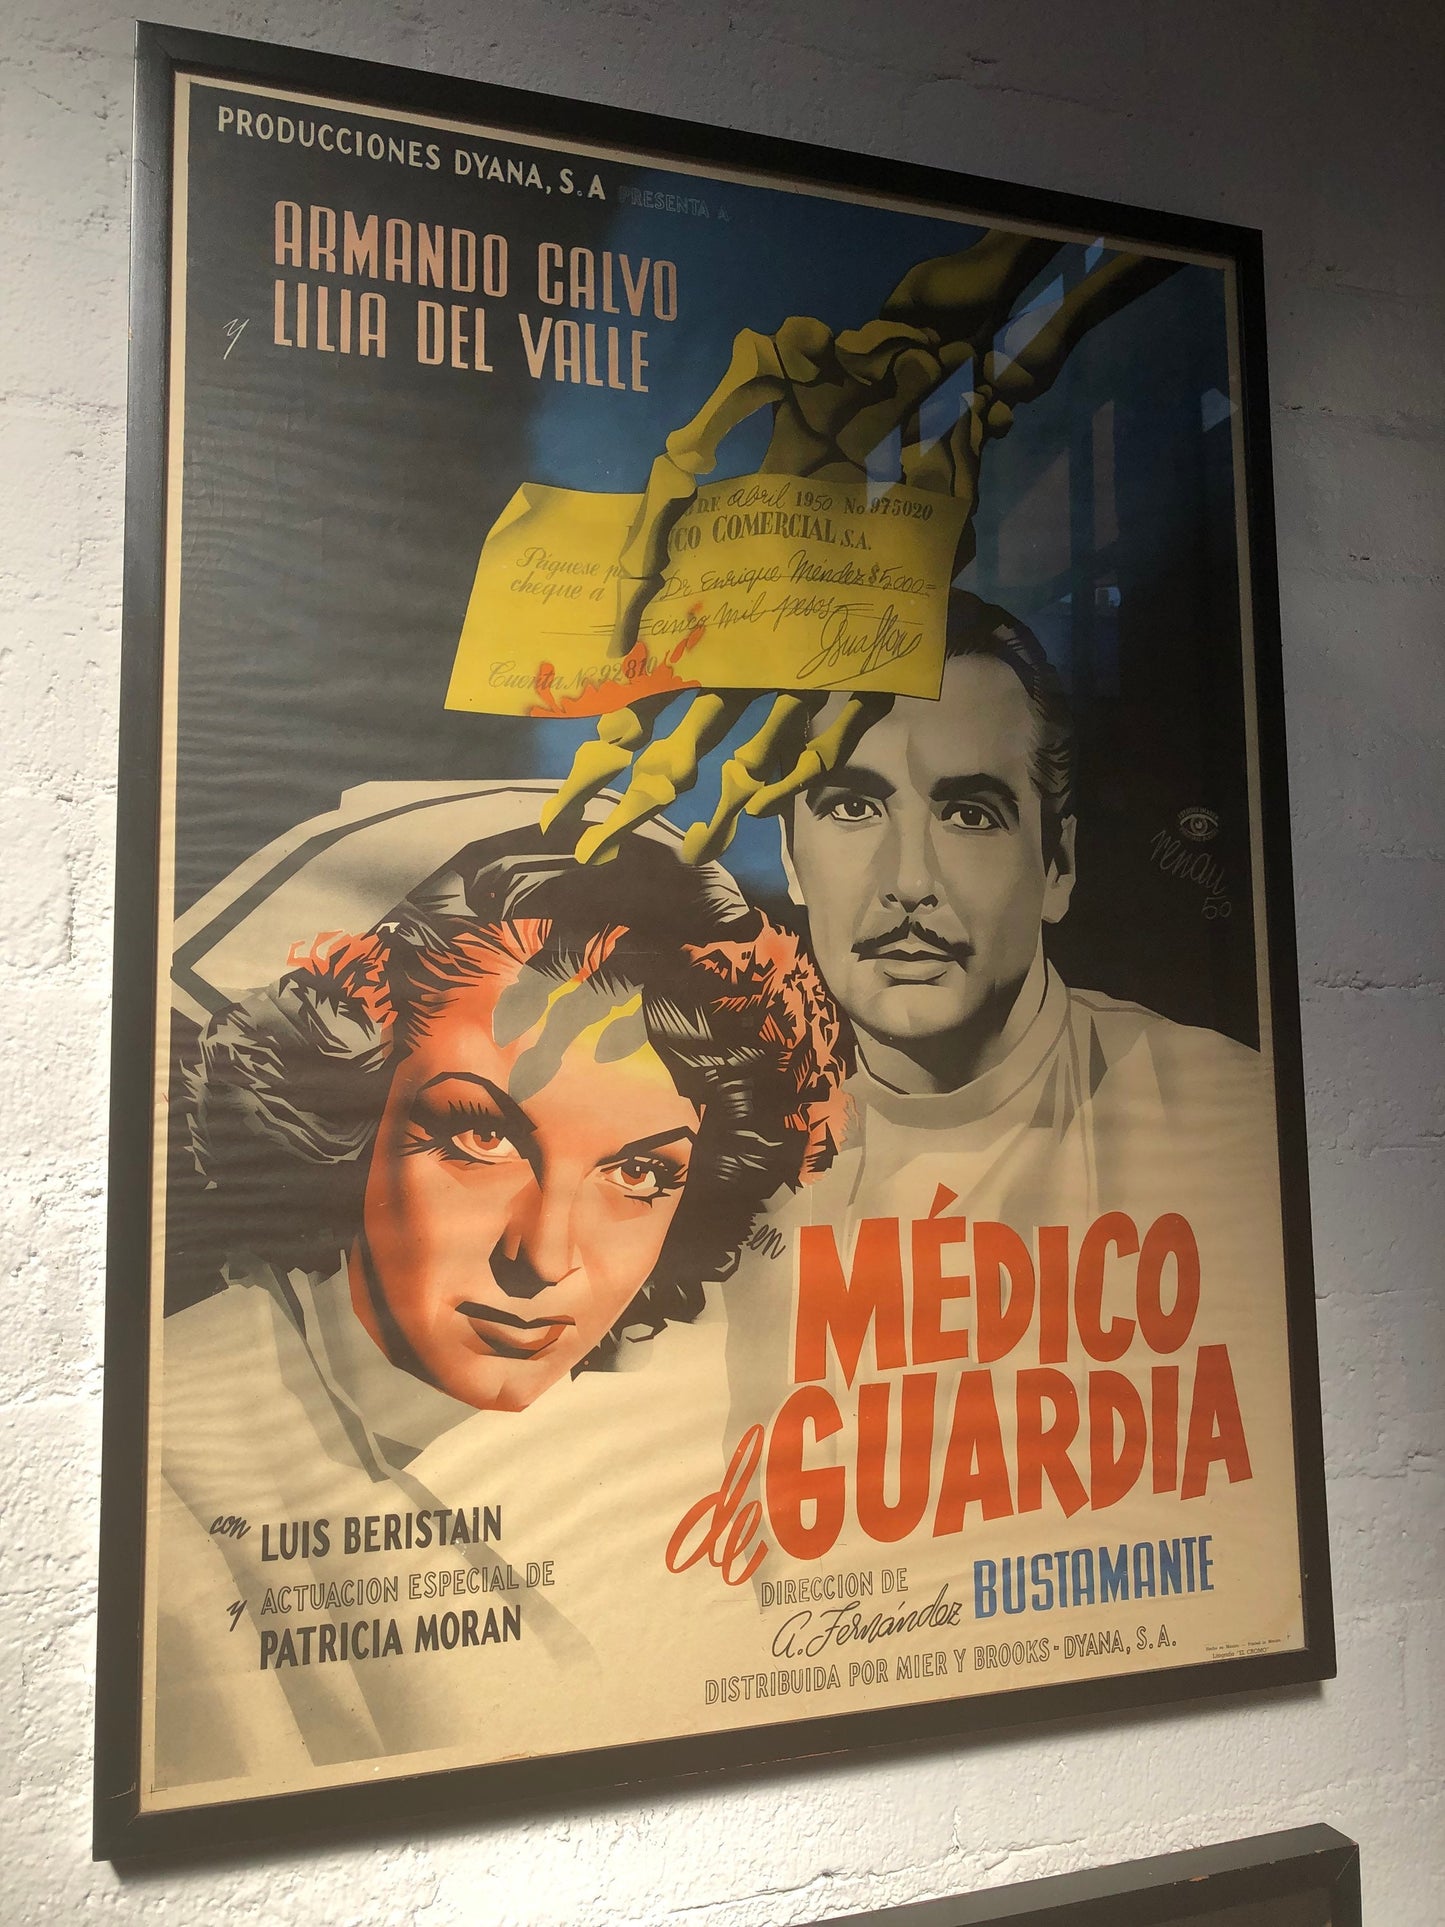 Vintage Mexican Film Movie Poster